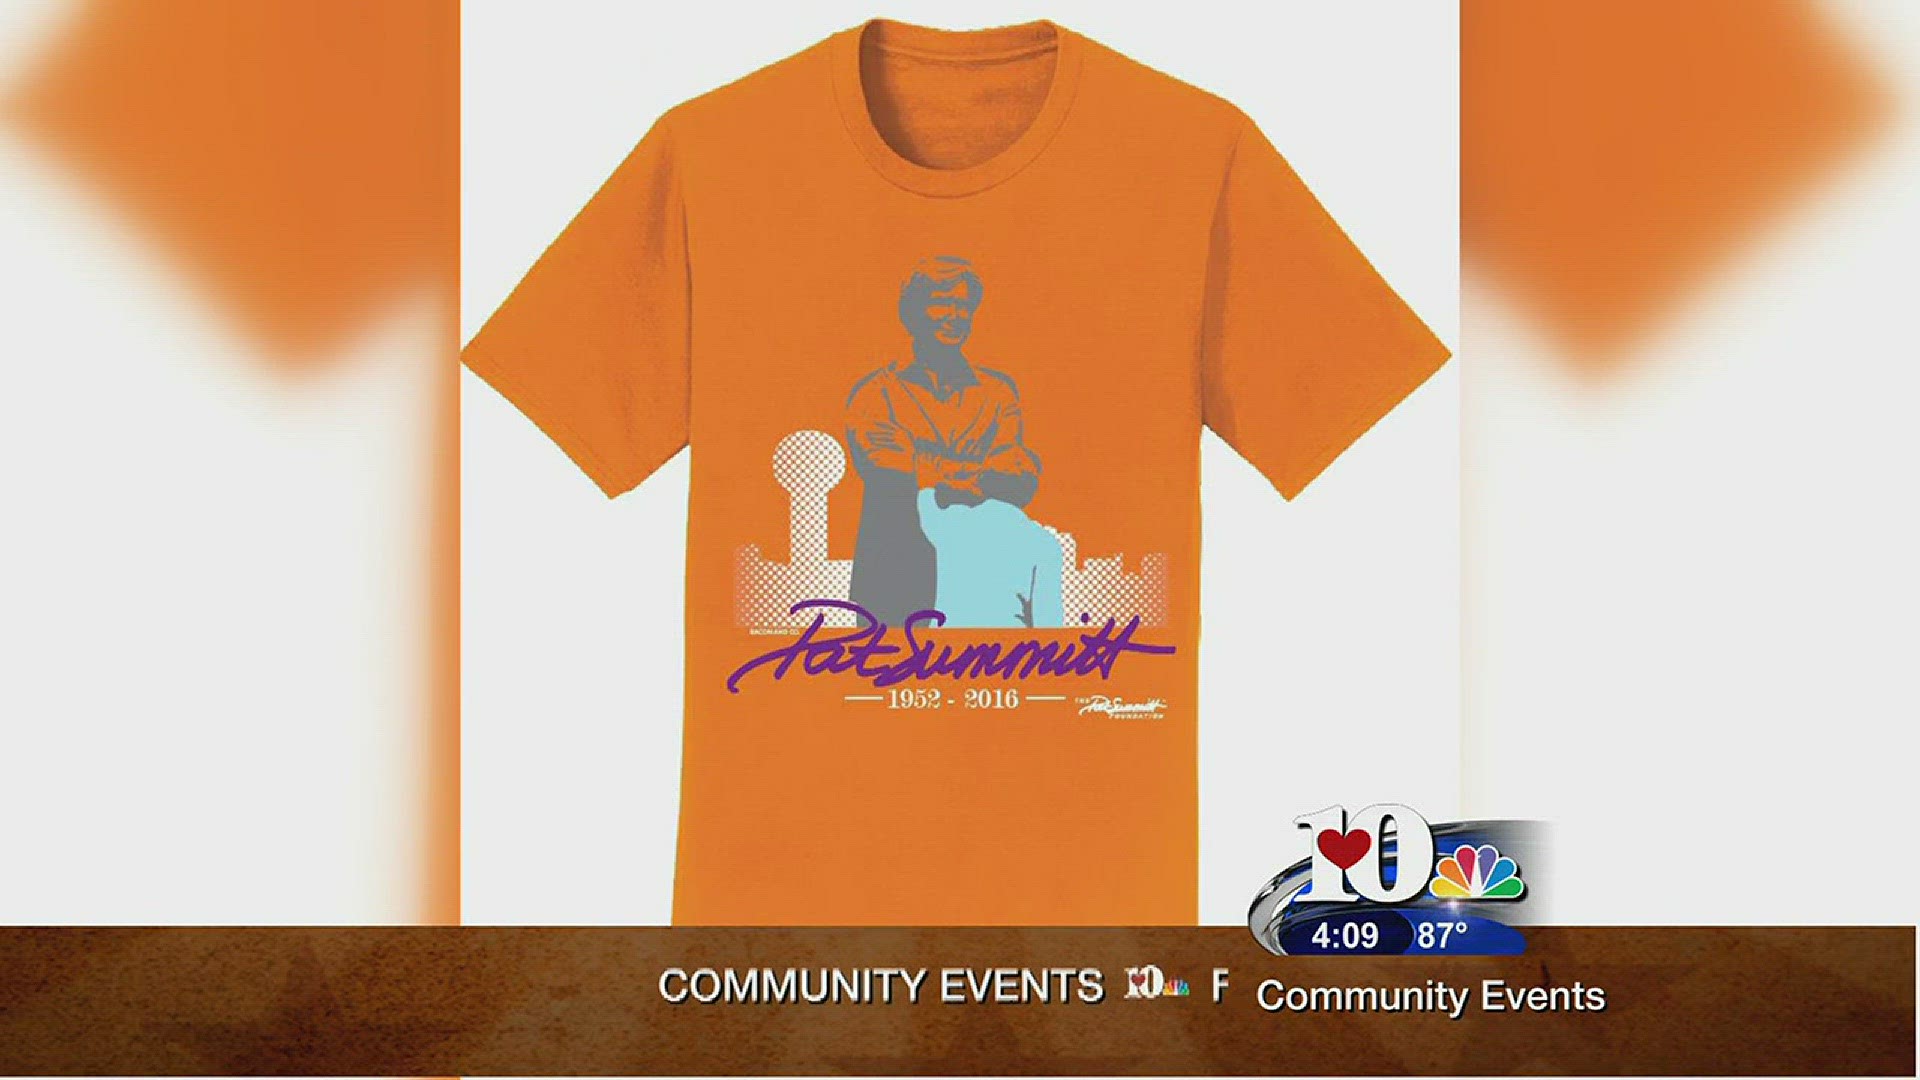 July 1, 2016Live at Five at 4The Pat Summitt Foundation has a commemorative t-shirt honoring the late Pat Summitt. It's available at patsummitt.orgPat Summitt was the head coach of the University of Tennessee Lady Volunteer basketball team until she wa